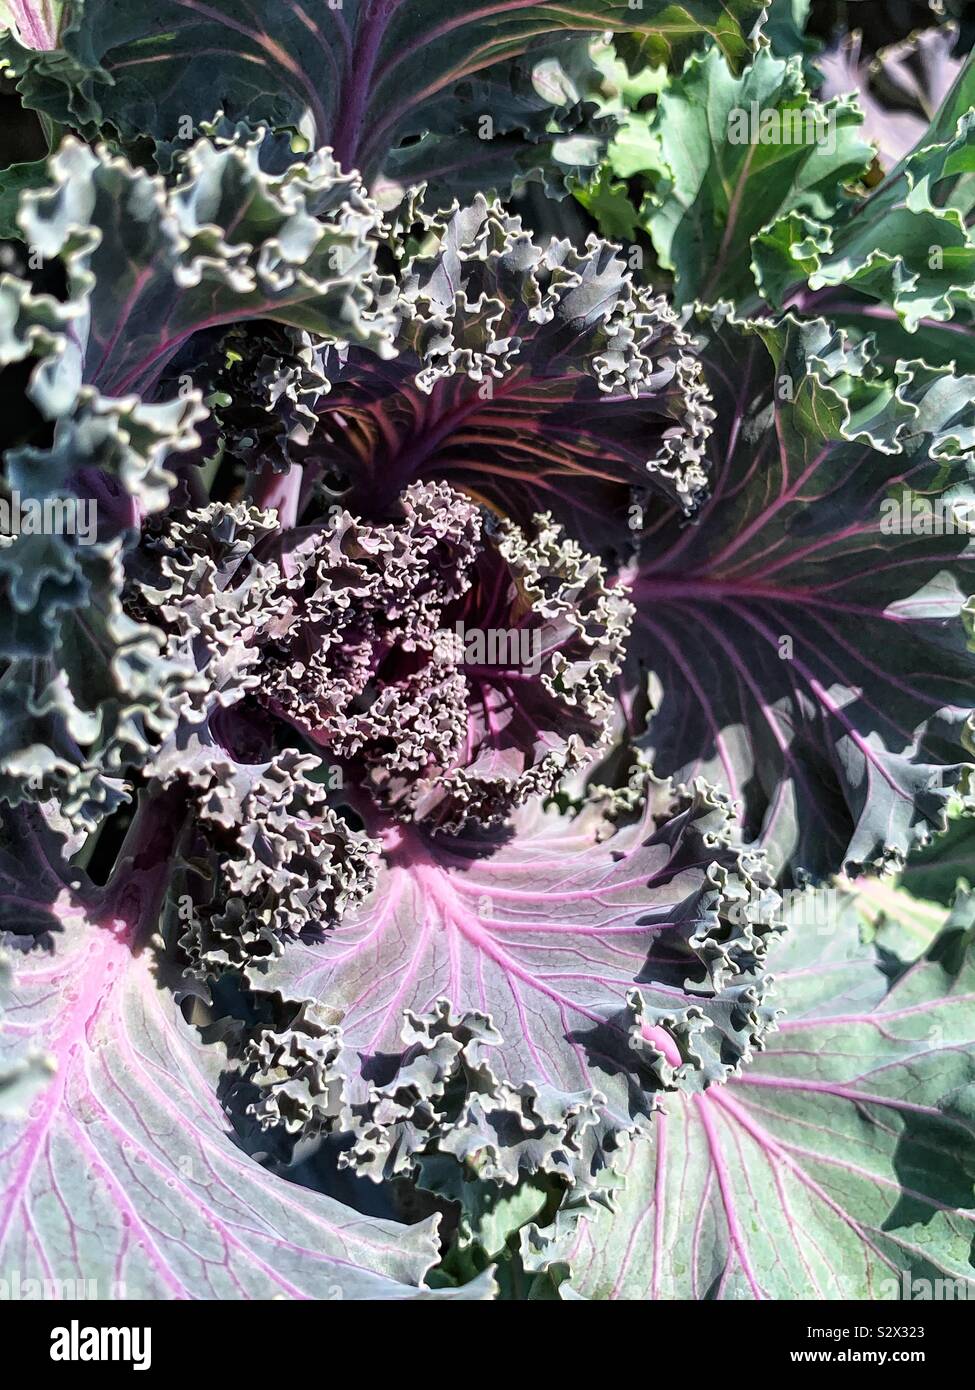 Purple kale cabbage plant in full bloom. Stock Photo